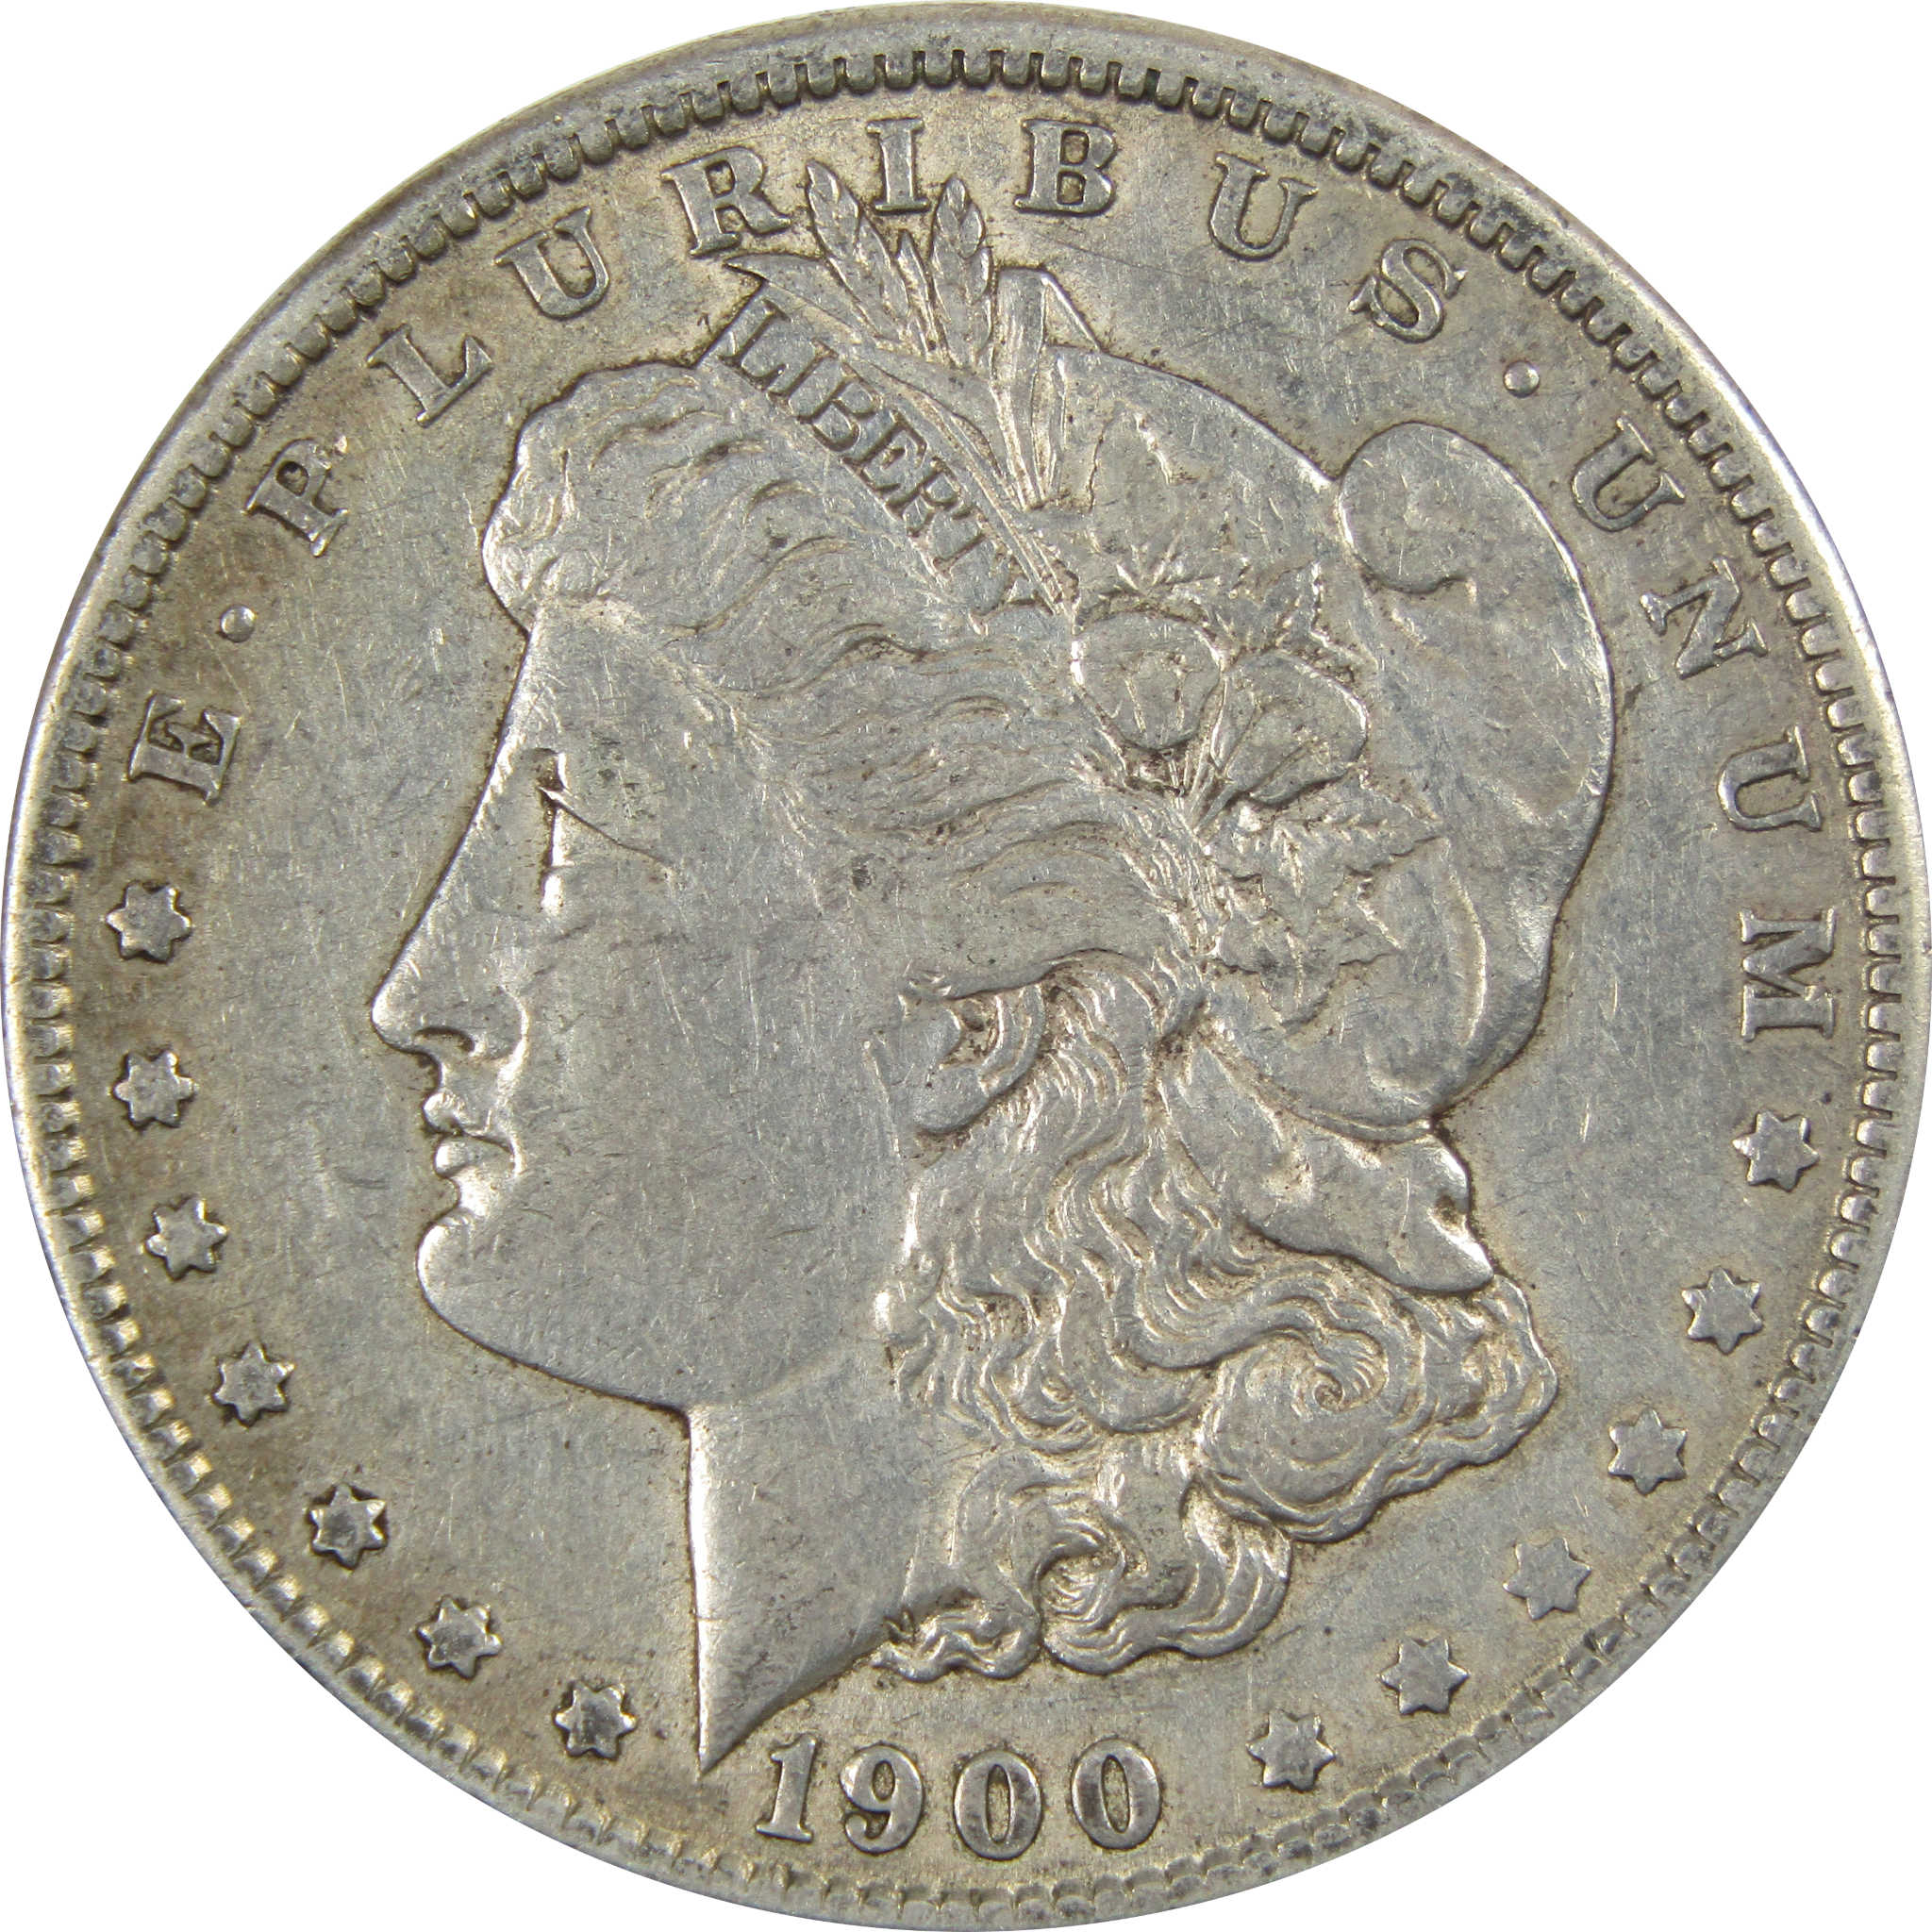 1900 O/CC Morgan Dollar XF EF Extremely Fine 90% Silver SKU:I7055 - Morgan coin - Morgan silver dollar - Morgan silver dollar for sale - Profile Coins &amp; Collectibles